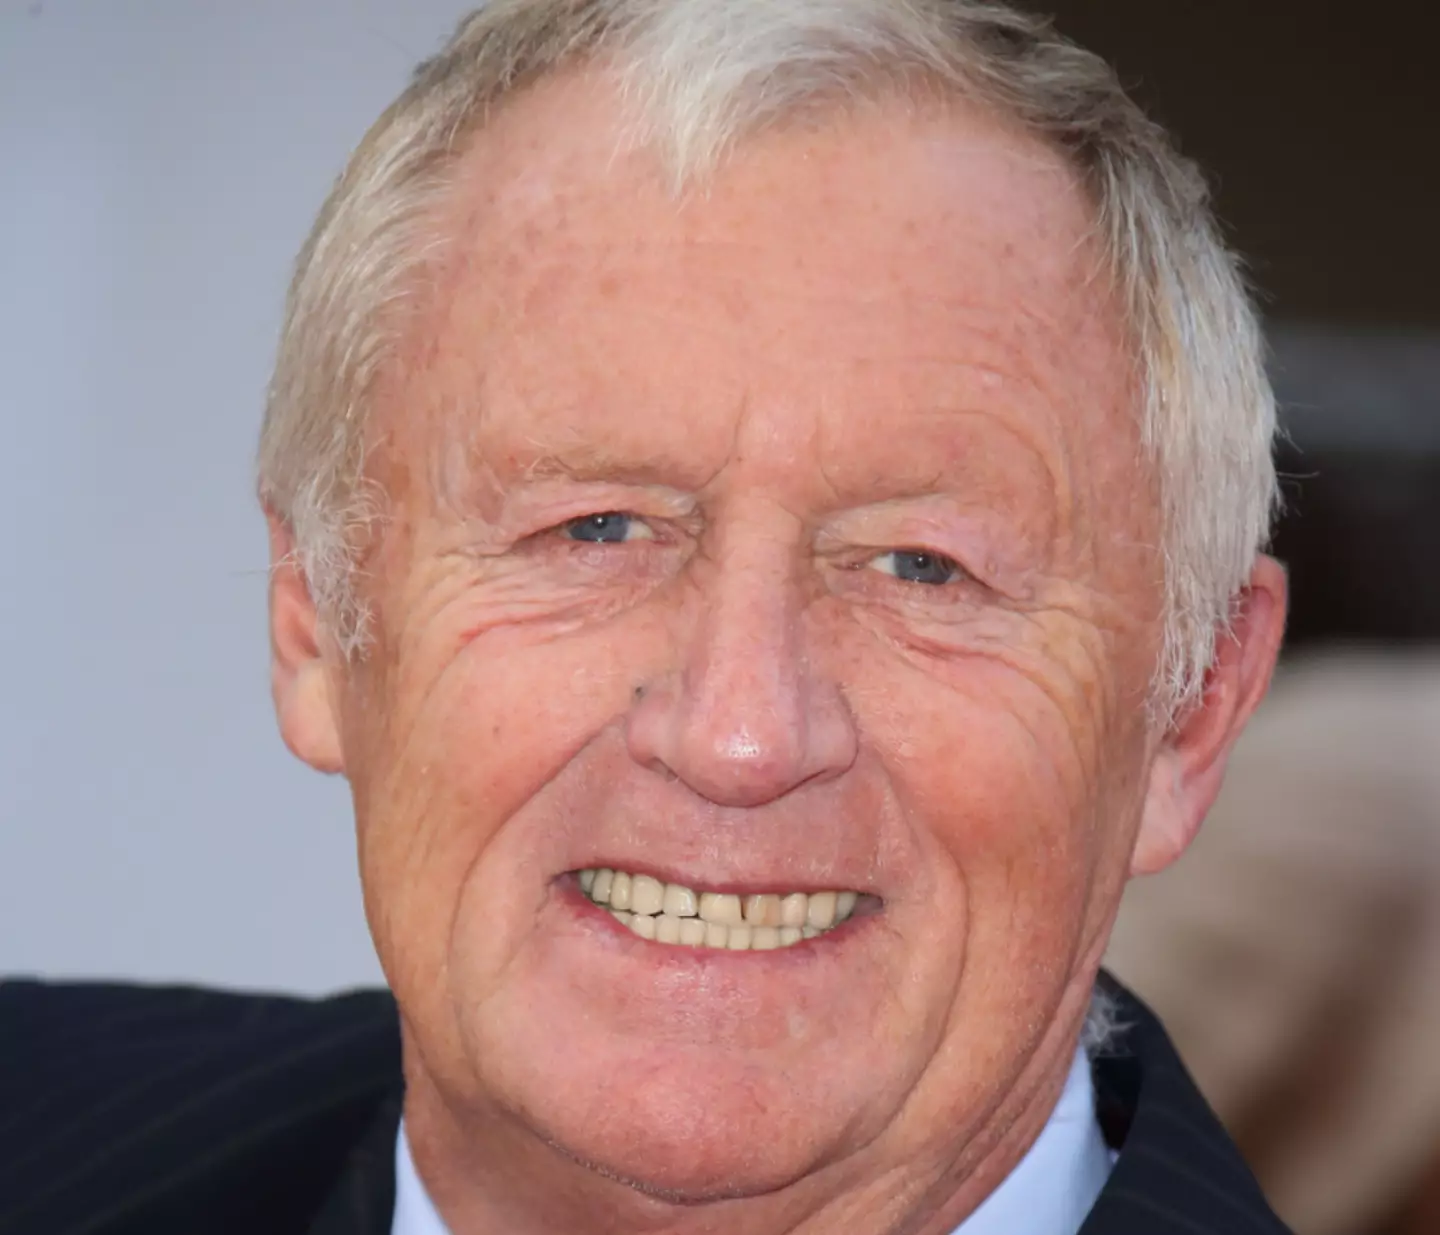 Chris Tarrant said the fight claims were 'nonsense'.